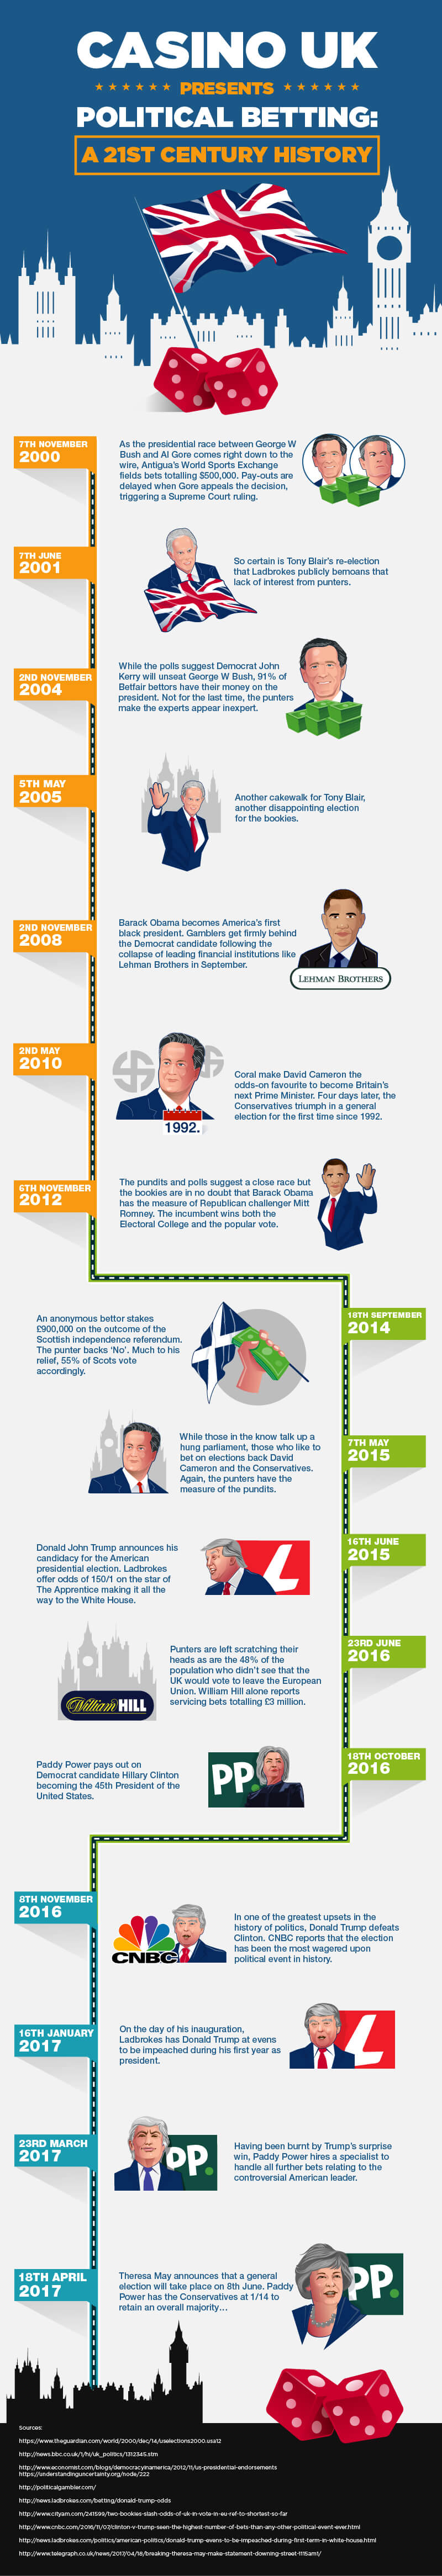 An infographic depicting a timeline of mergers and acquisitions within the casino industsry